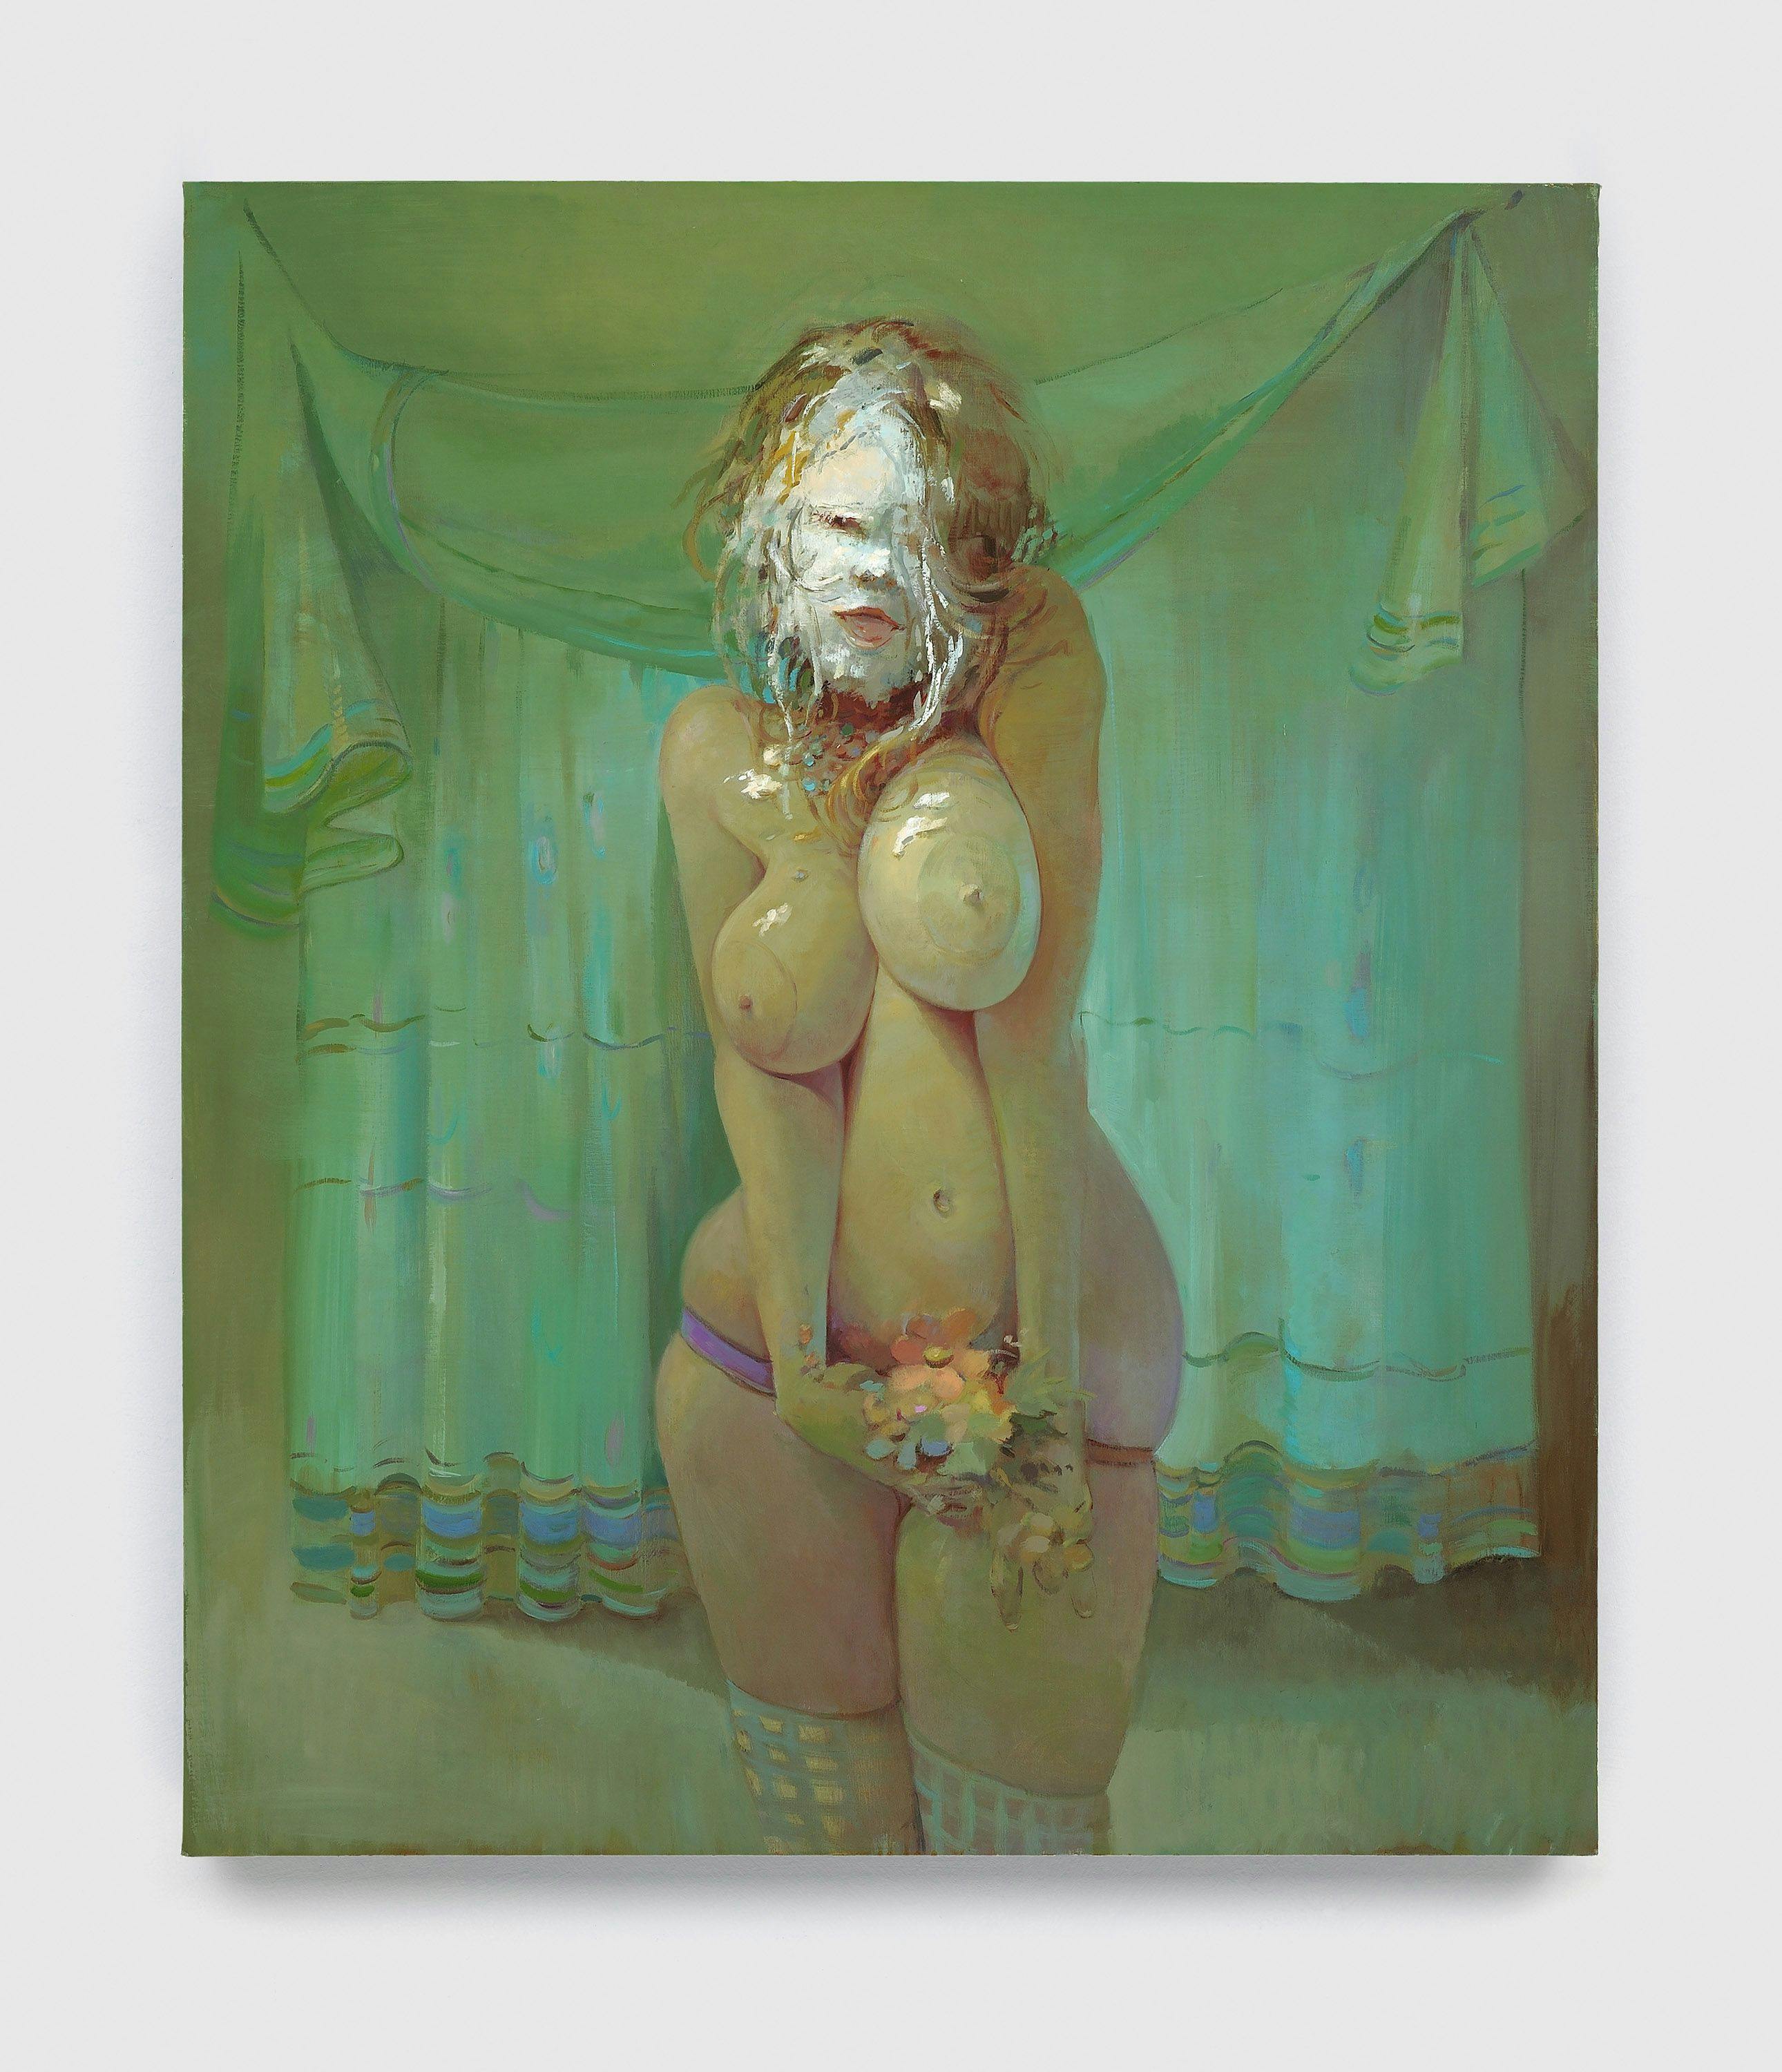 A painting by Lisa Yuskavage, titled PieFace, dated 2008.